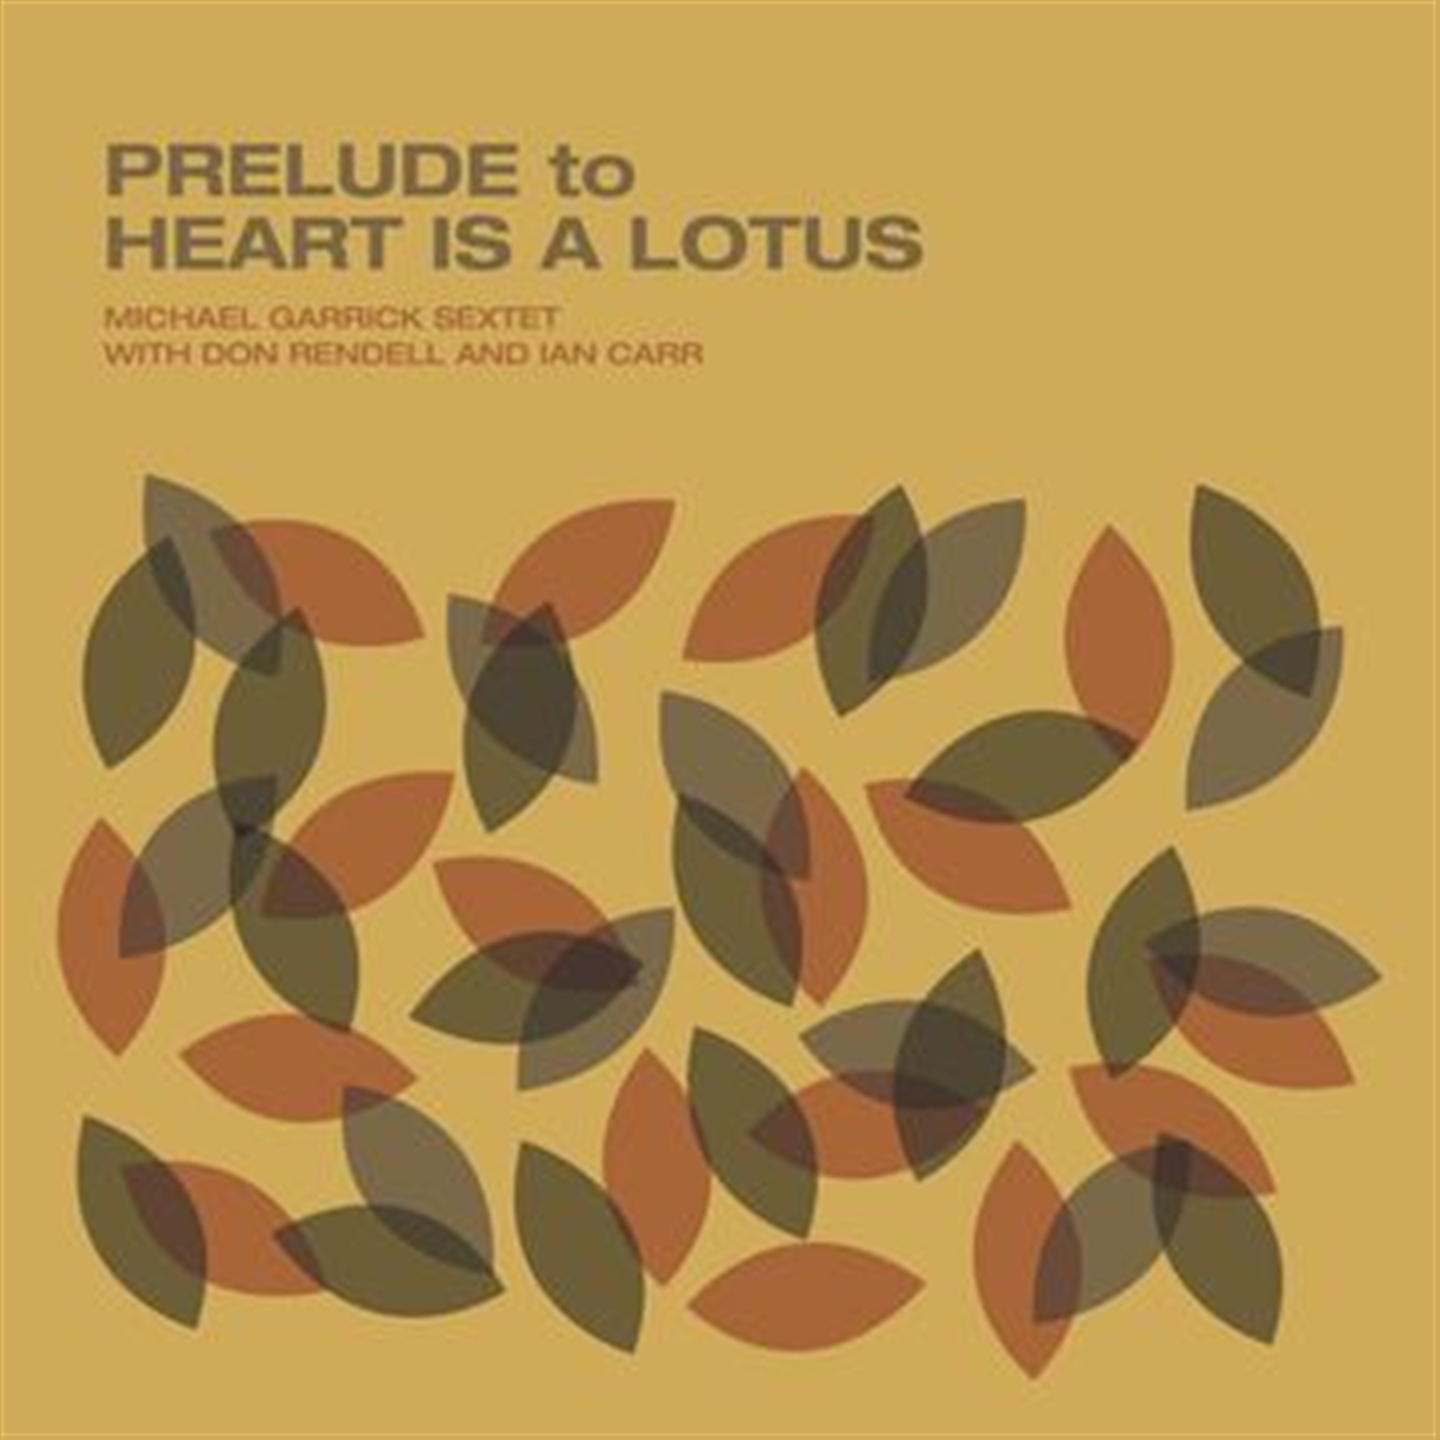 PRELUDE TO A HEART IS A LOTUS